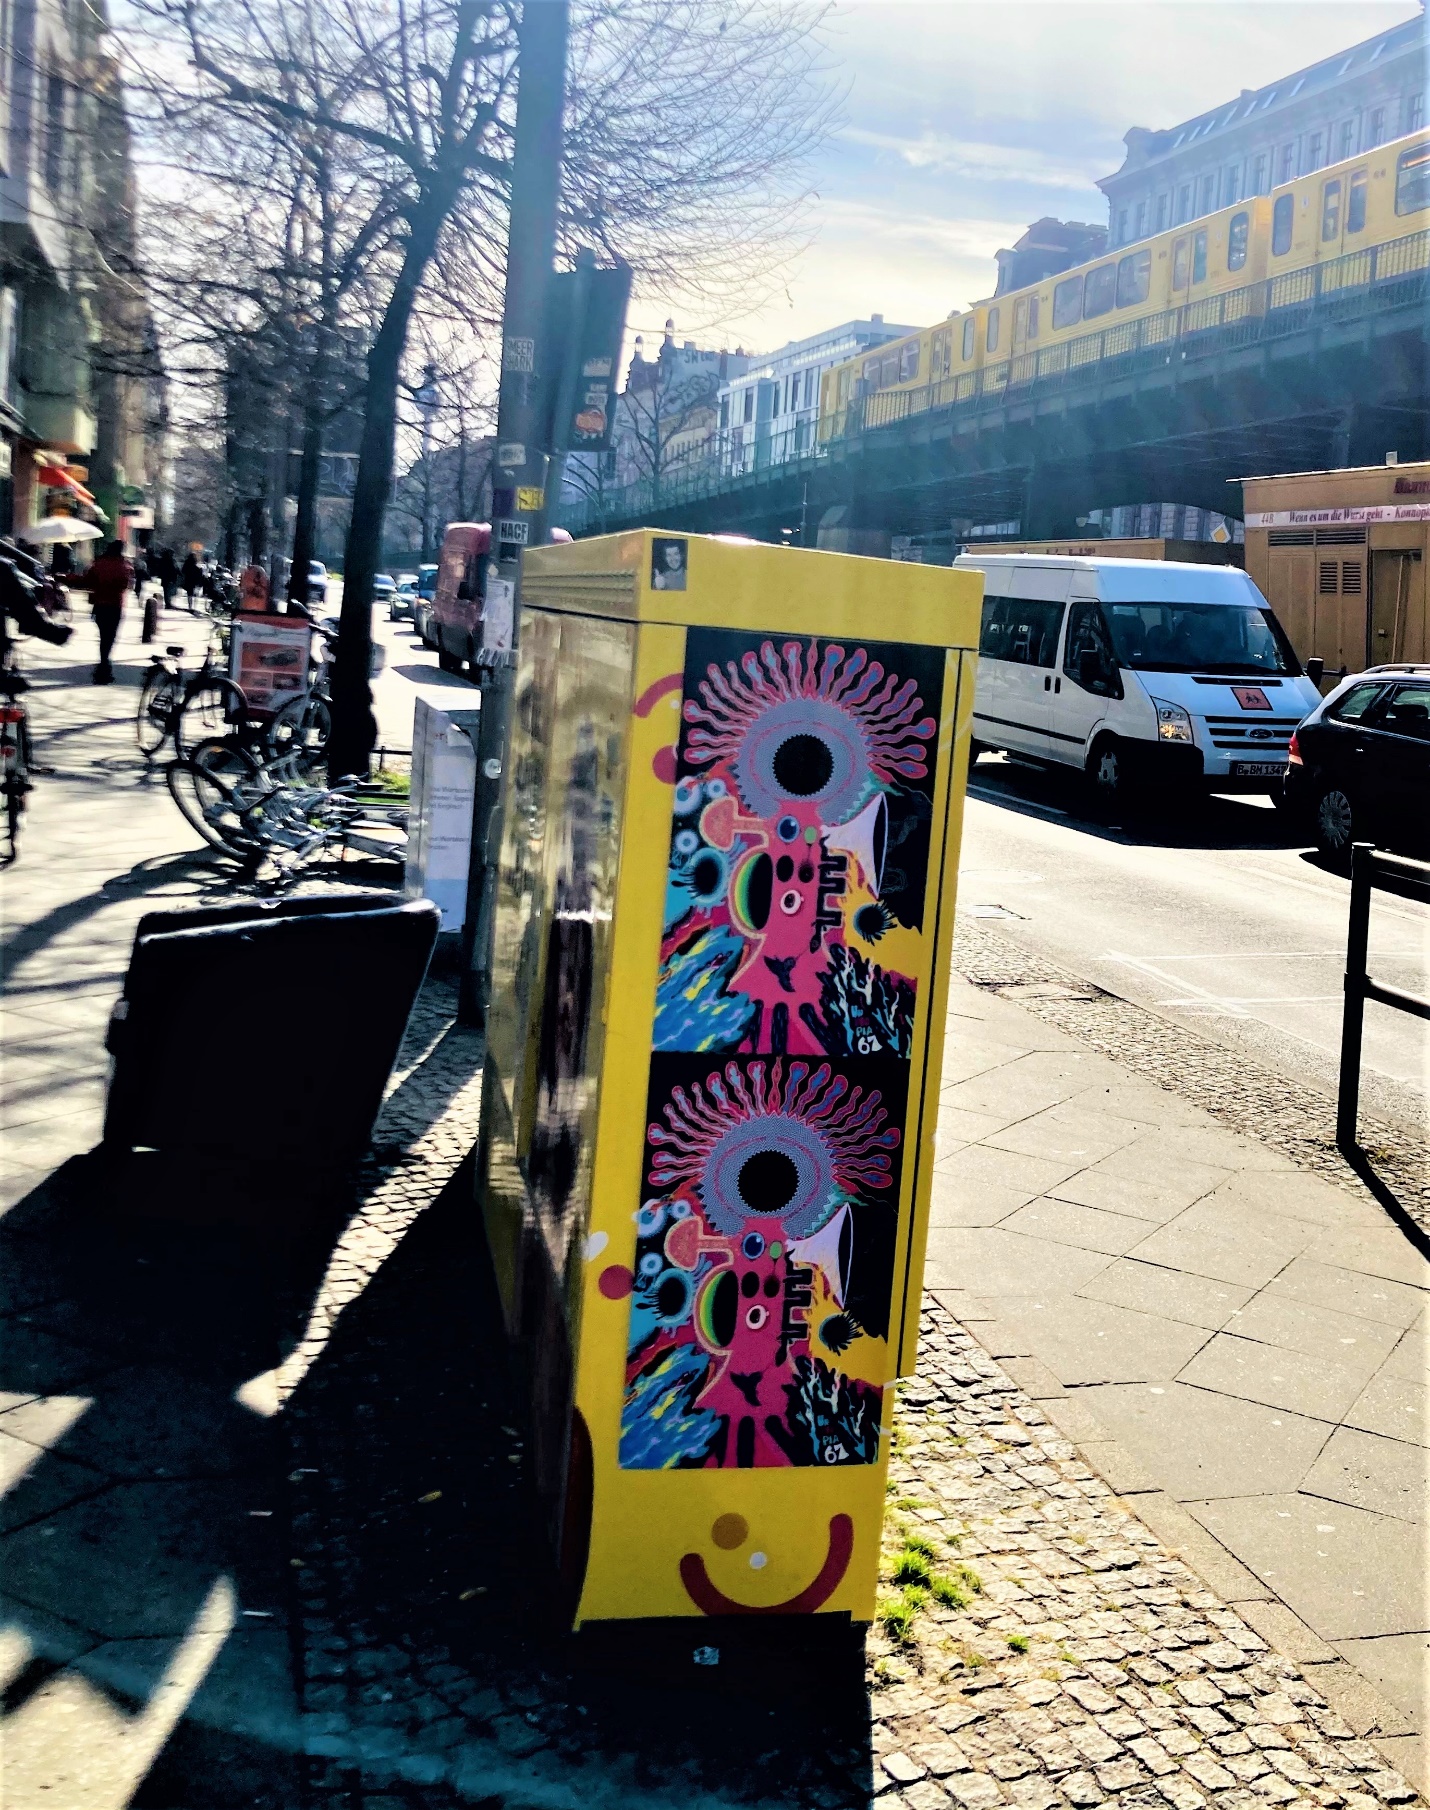 A couple of Unitopia 67 posters on an outdoor electrical box in the streets of Berlin.